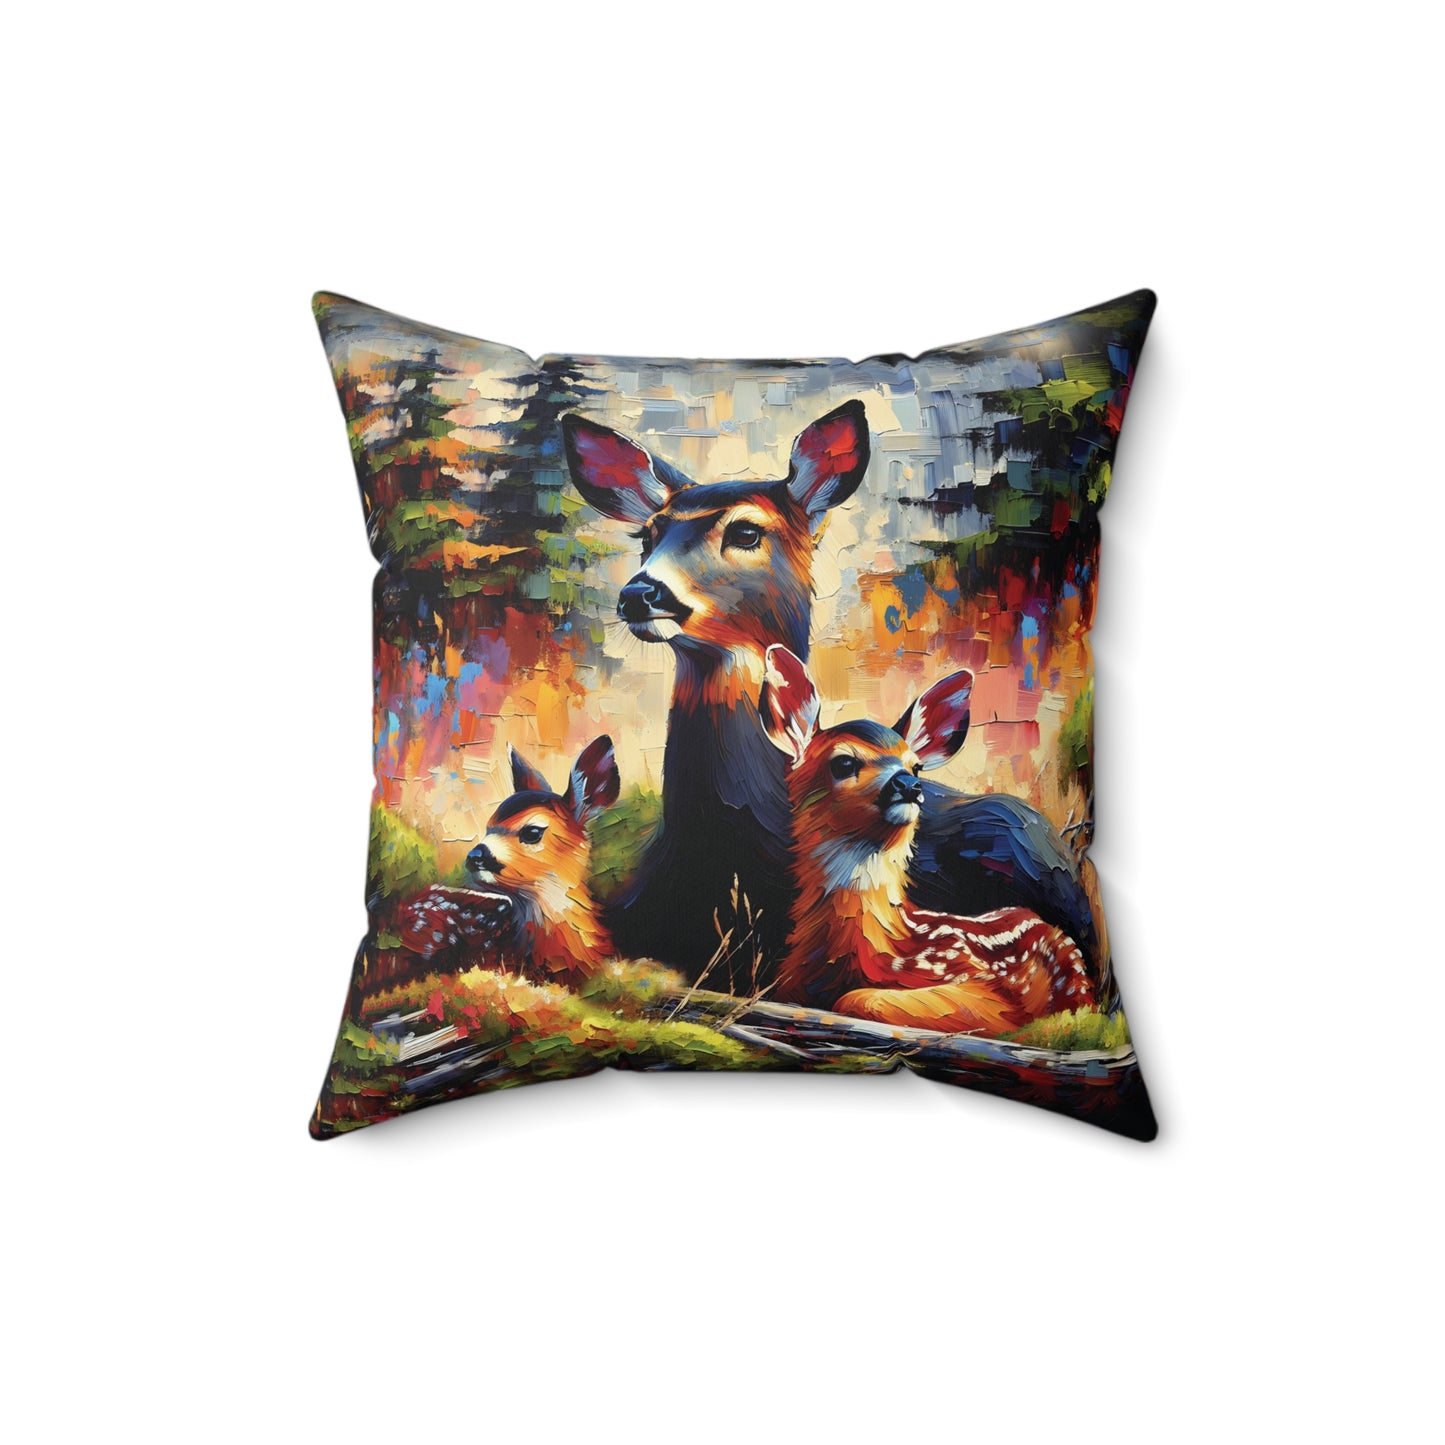 Black Tail Doe with Fawns - Square Pillows